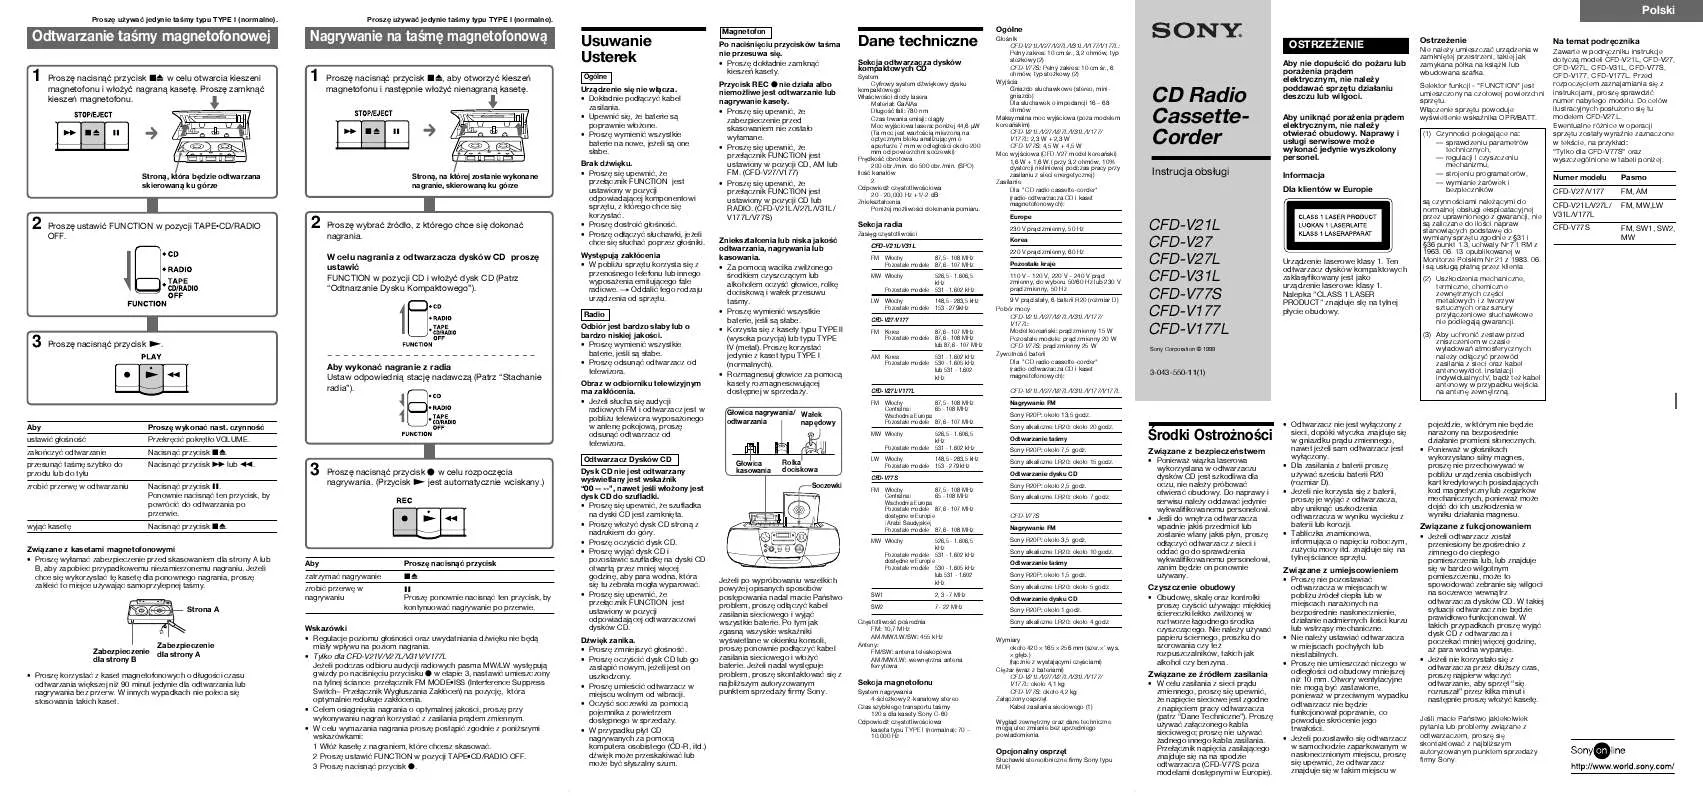 Mode d'emploi SONY CFD-V27